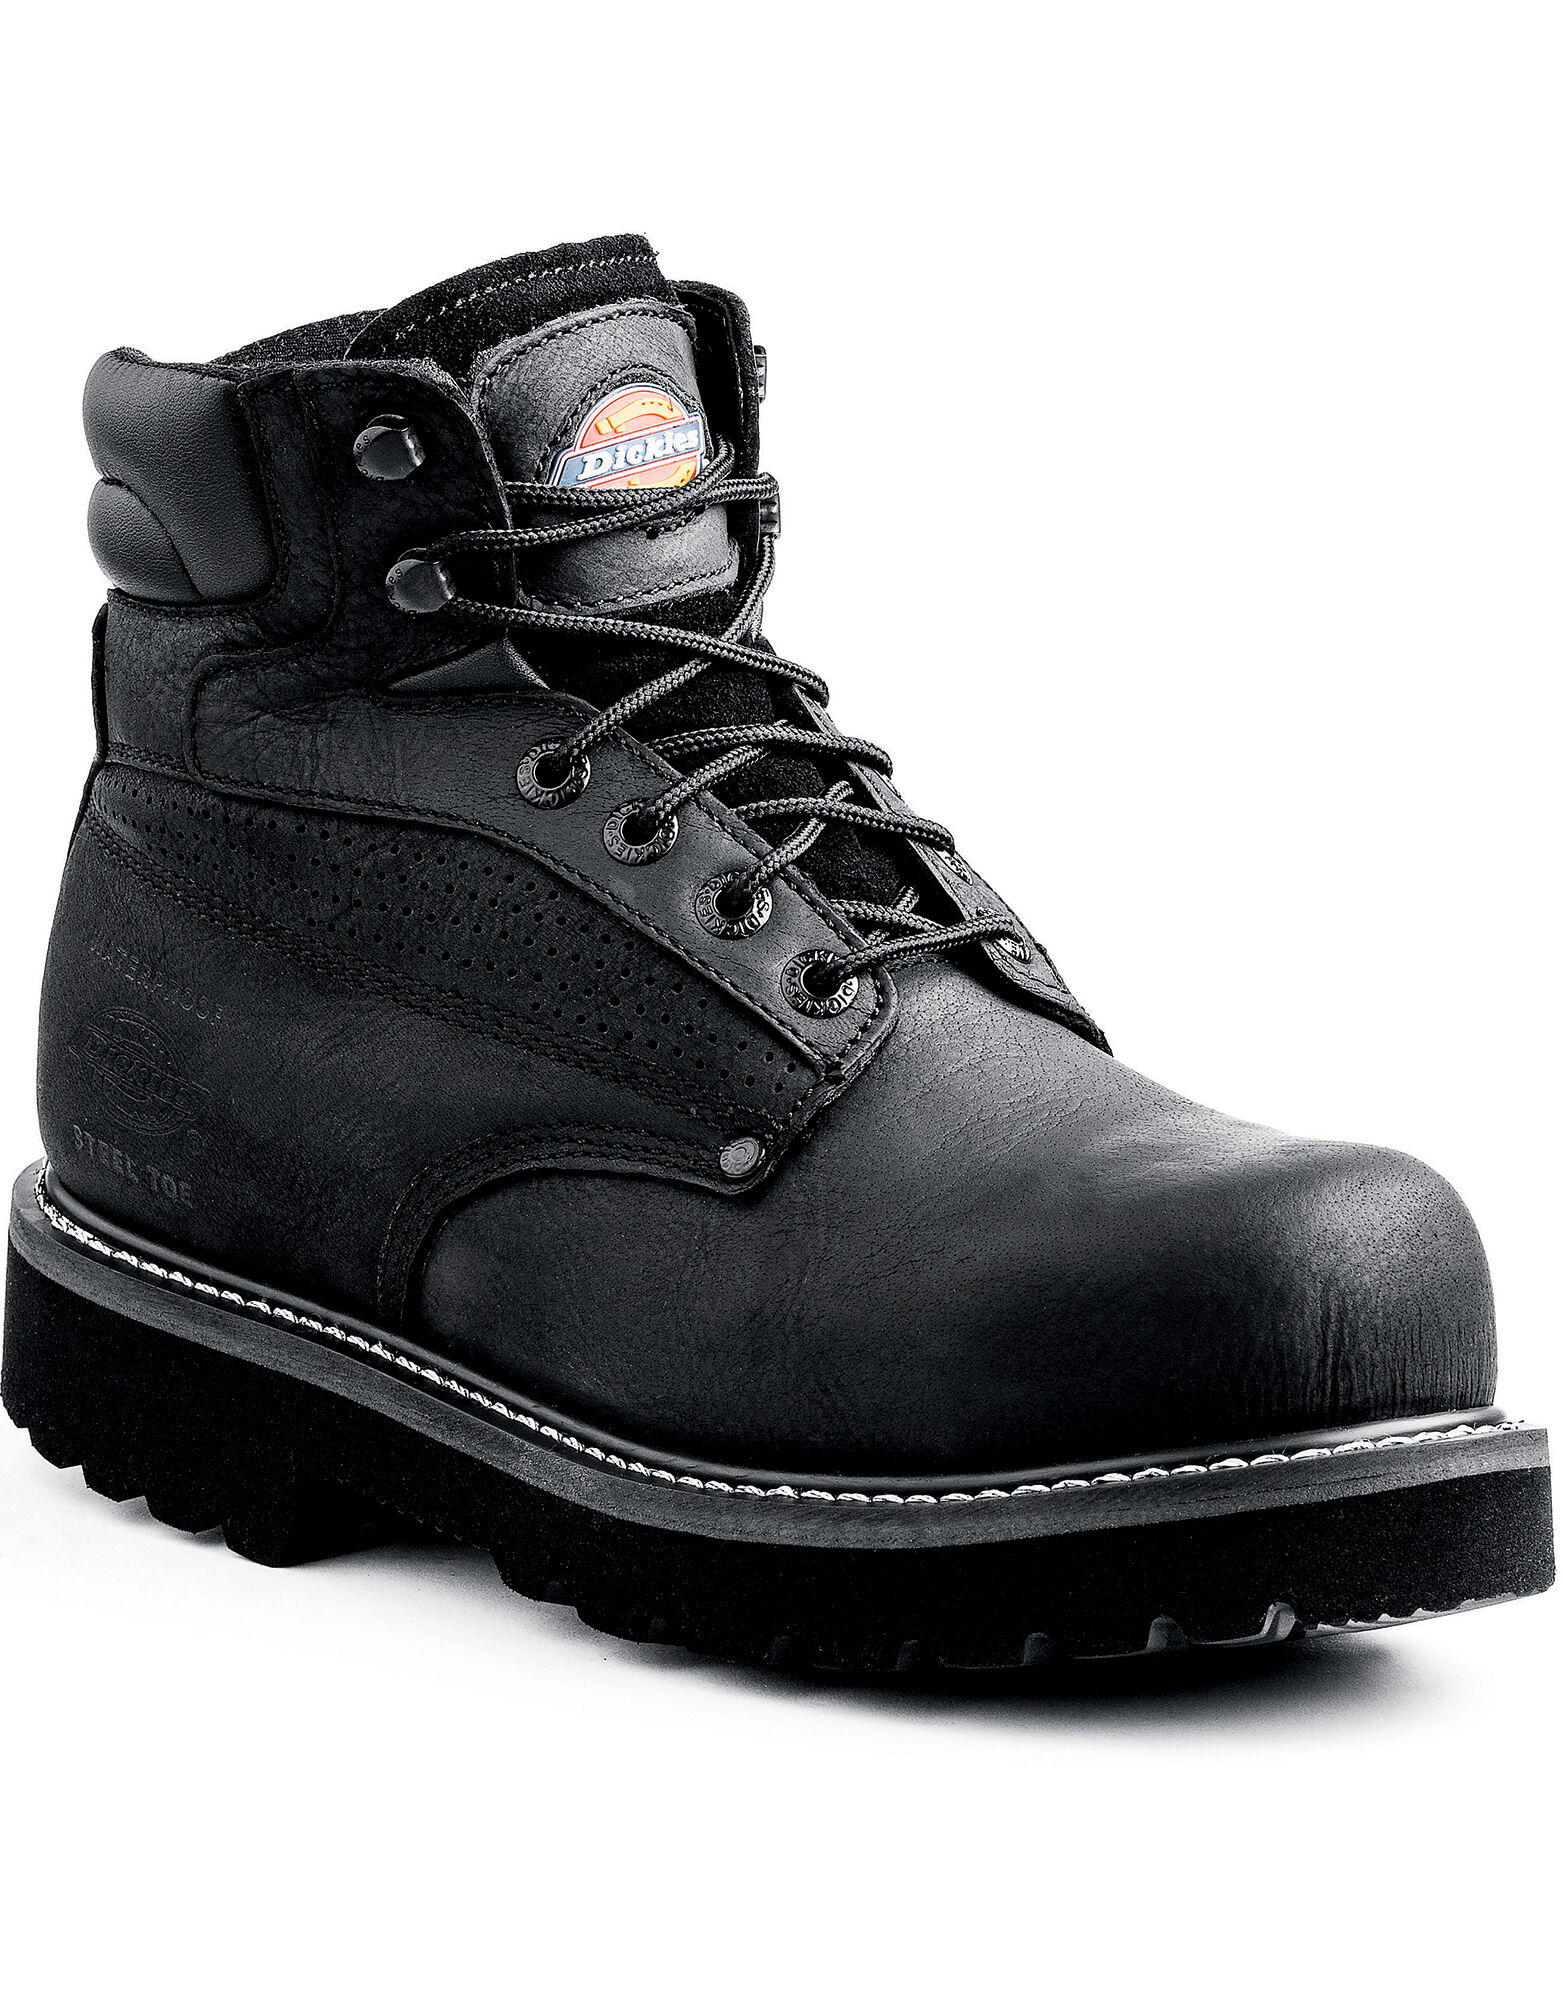 dickie work boots